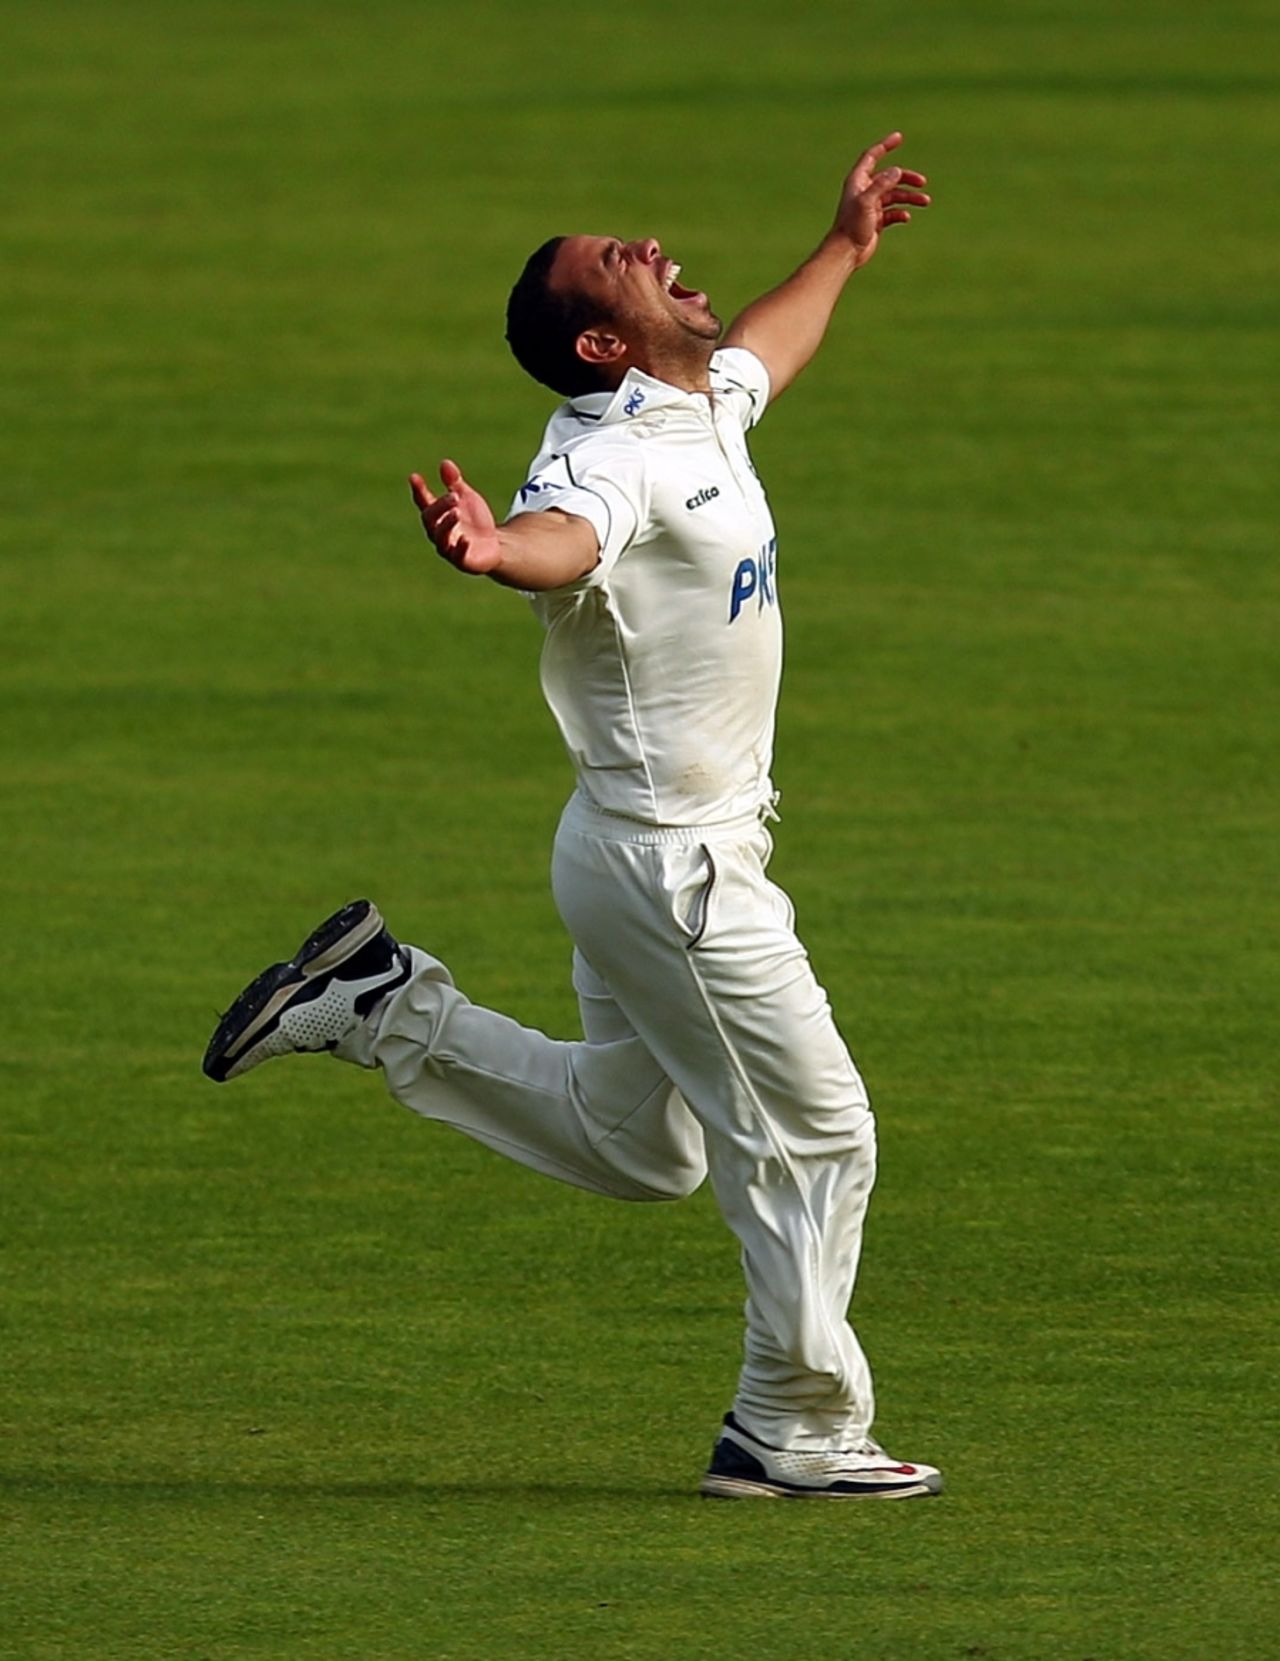 An ecstatic Andre Adams celebrates taking the wicket that secured the Championship for Nottinghamshire, Lancashire v Nottinghamshire, County Championship Division One, Old Trafford, September 16 2010